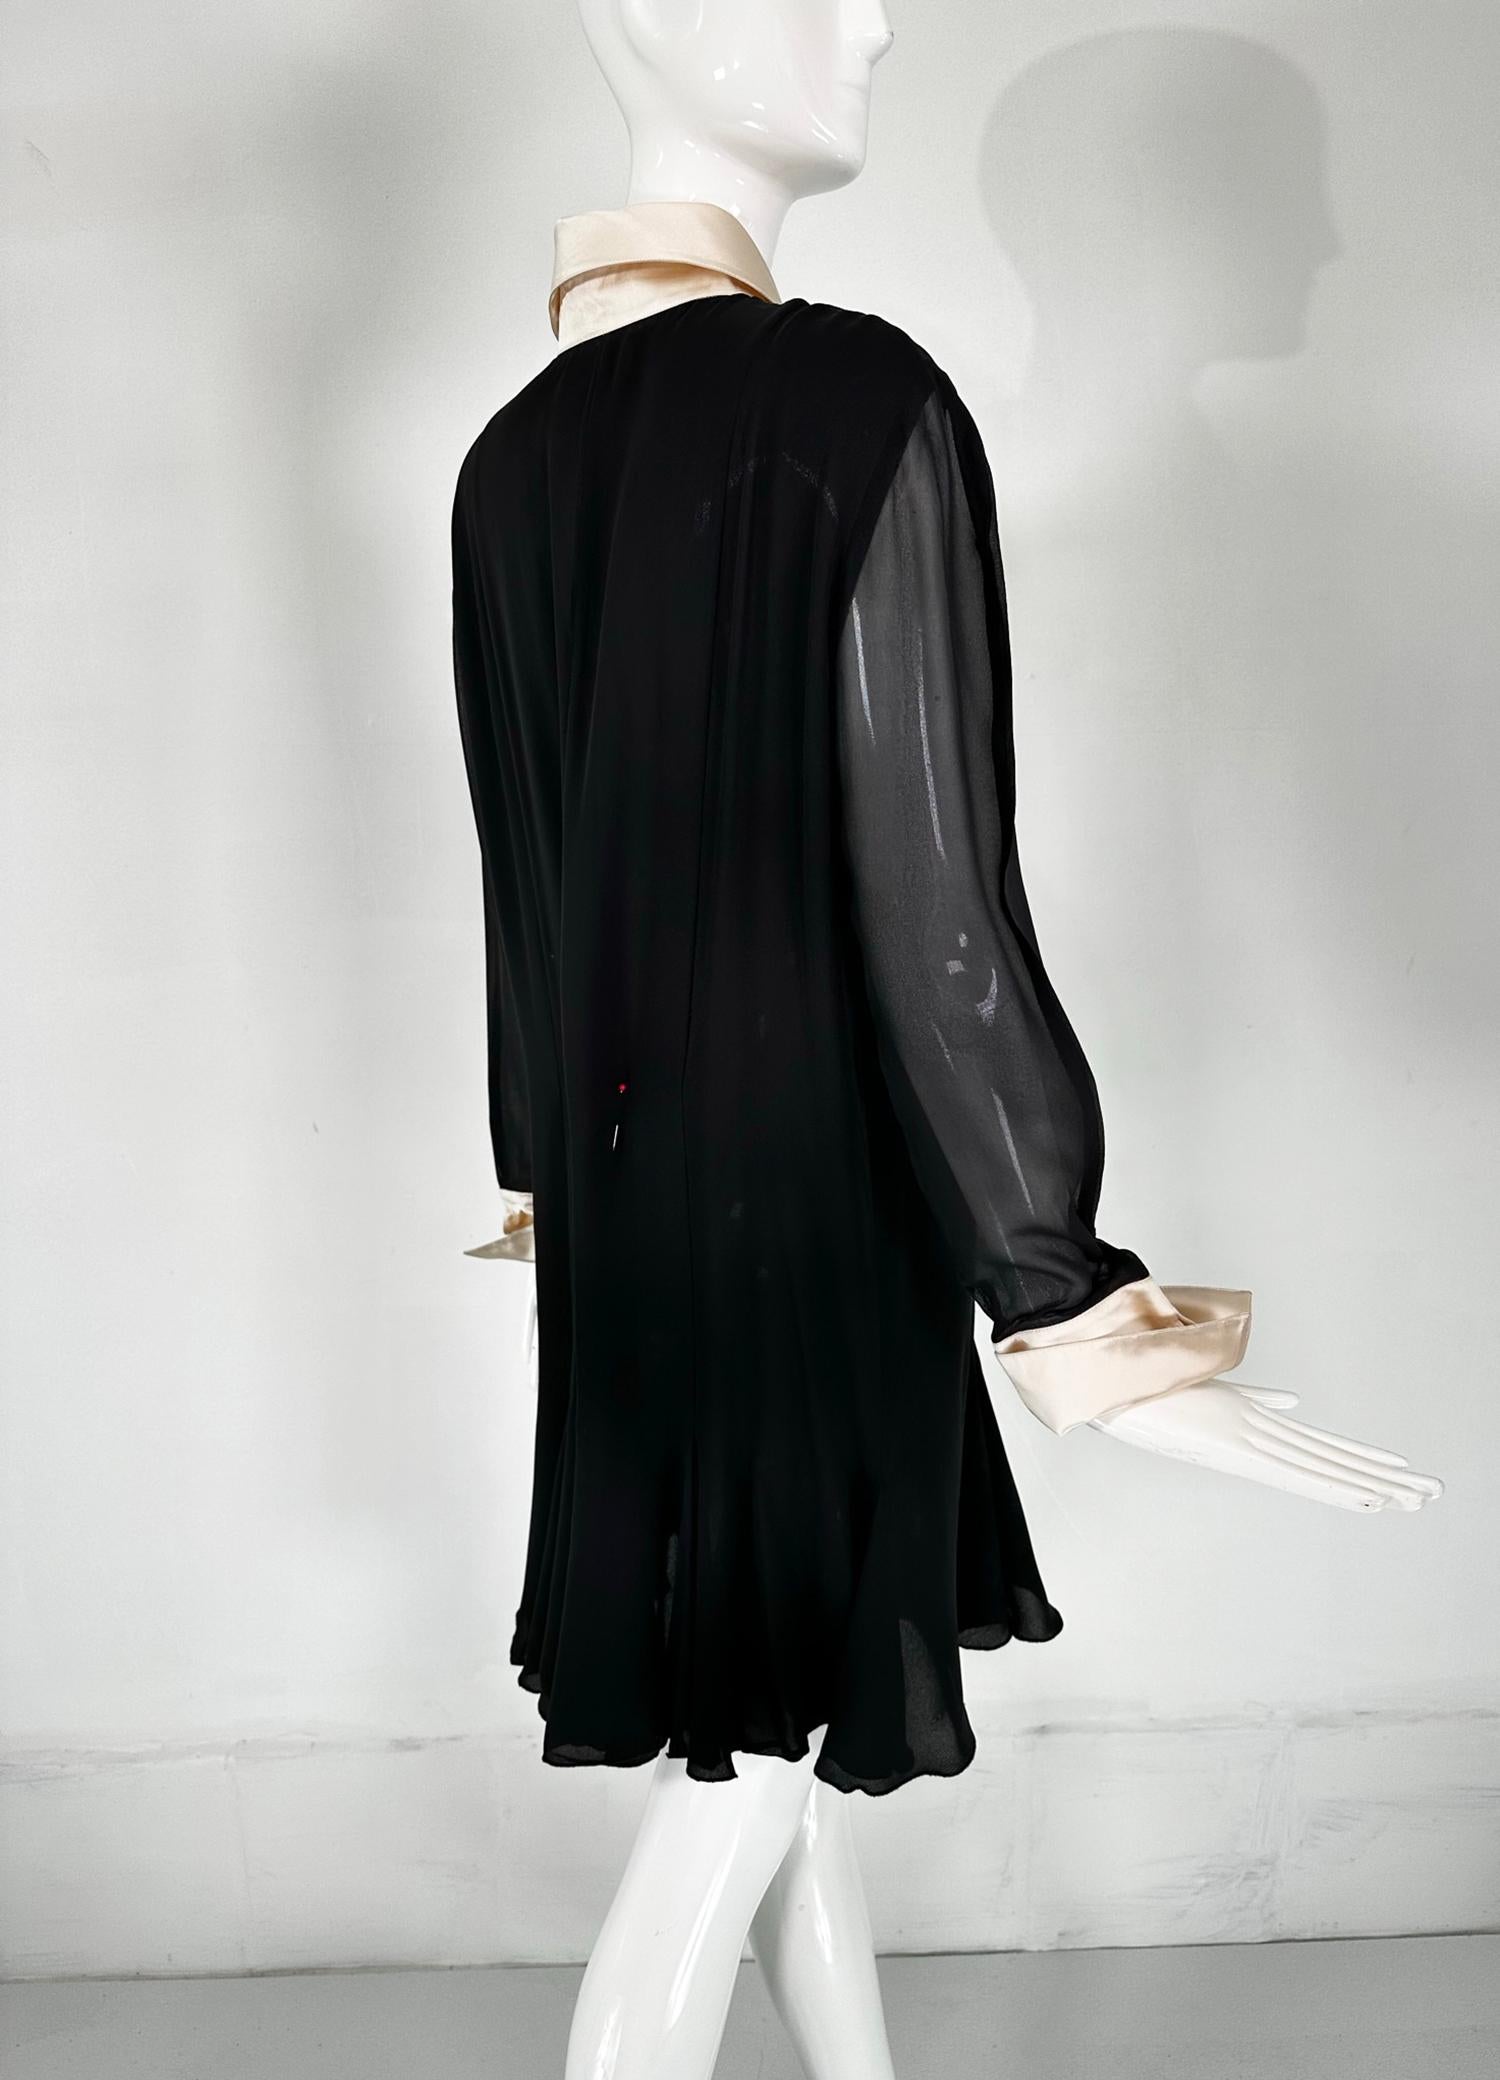 Christian Lacroix Black Silk Chiffon Dress With Off White Silk Collar & Cuffs  In Good Condition For Sale In West Palm Beach, FL